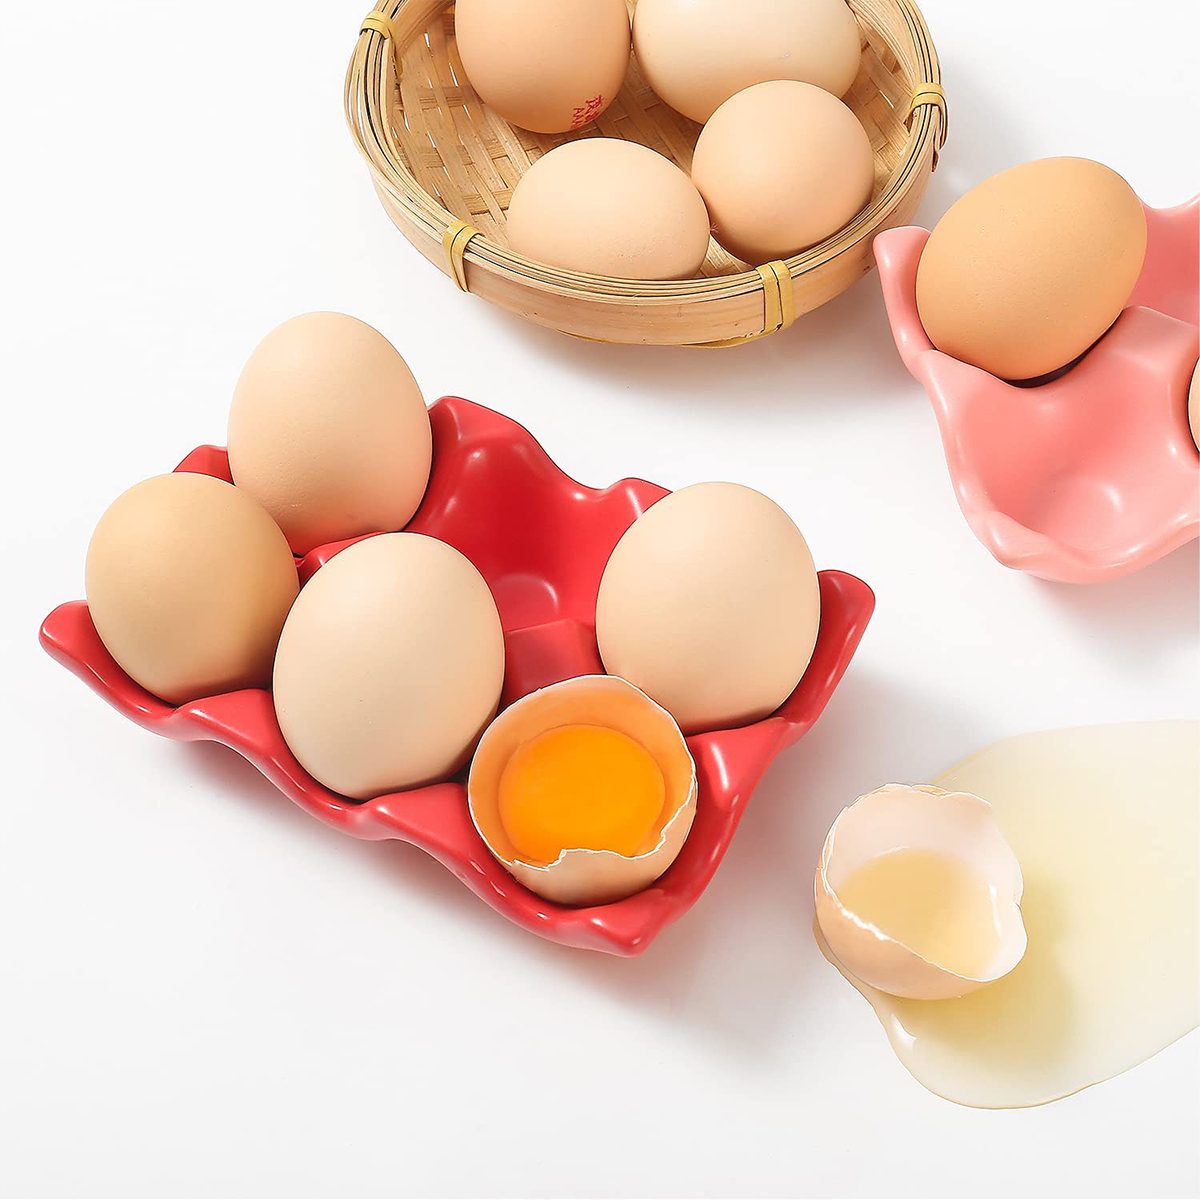 This Ceramic Egg Holder Adds a Cool Aesthetic to Your Fridge